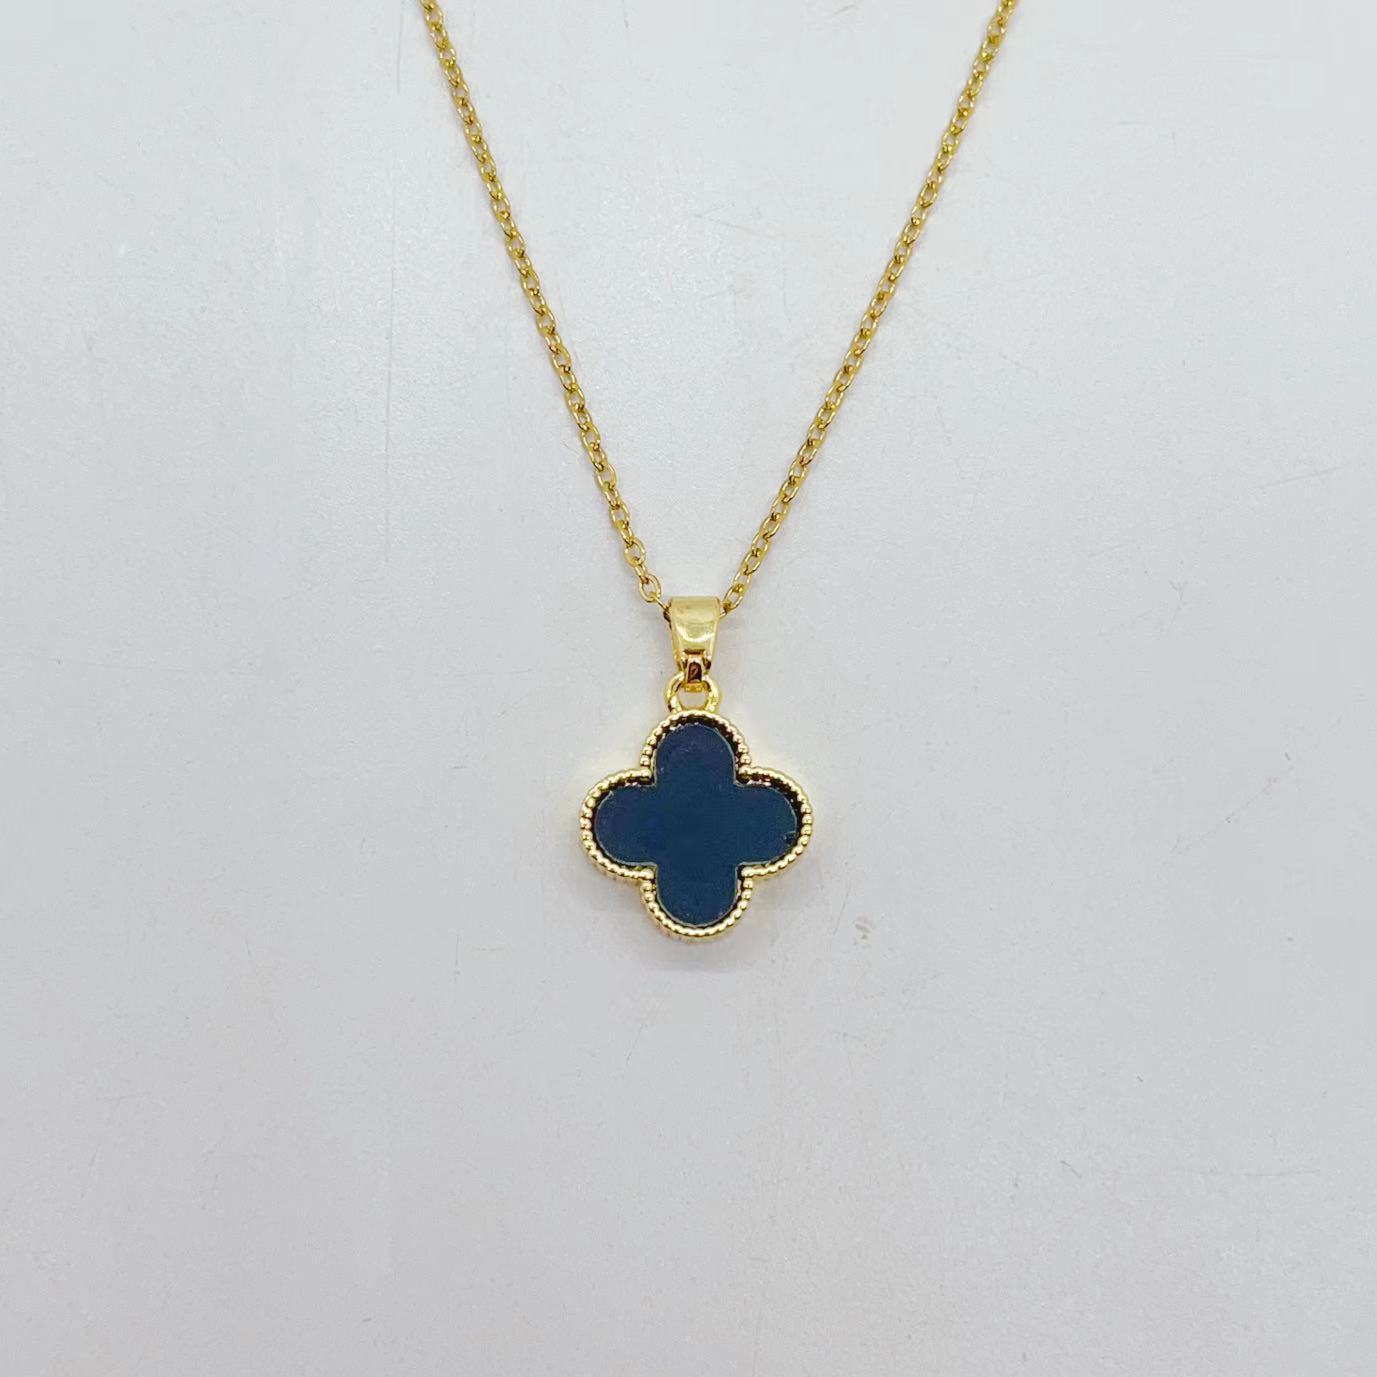 Classic Hot Sale Simple Temperament Four-Leaf Clover Necklace with Micro Inlaid Zircon All-Match Clavicle Chain on Both Sides